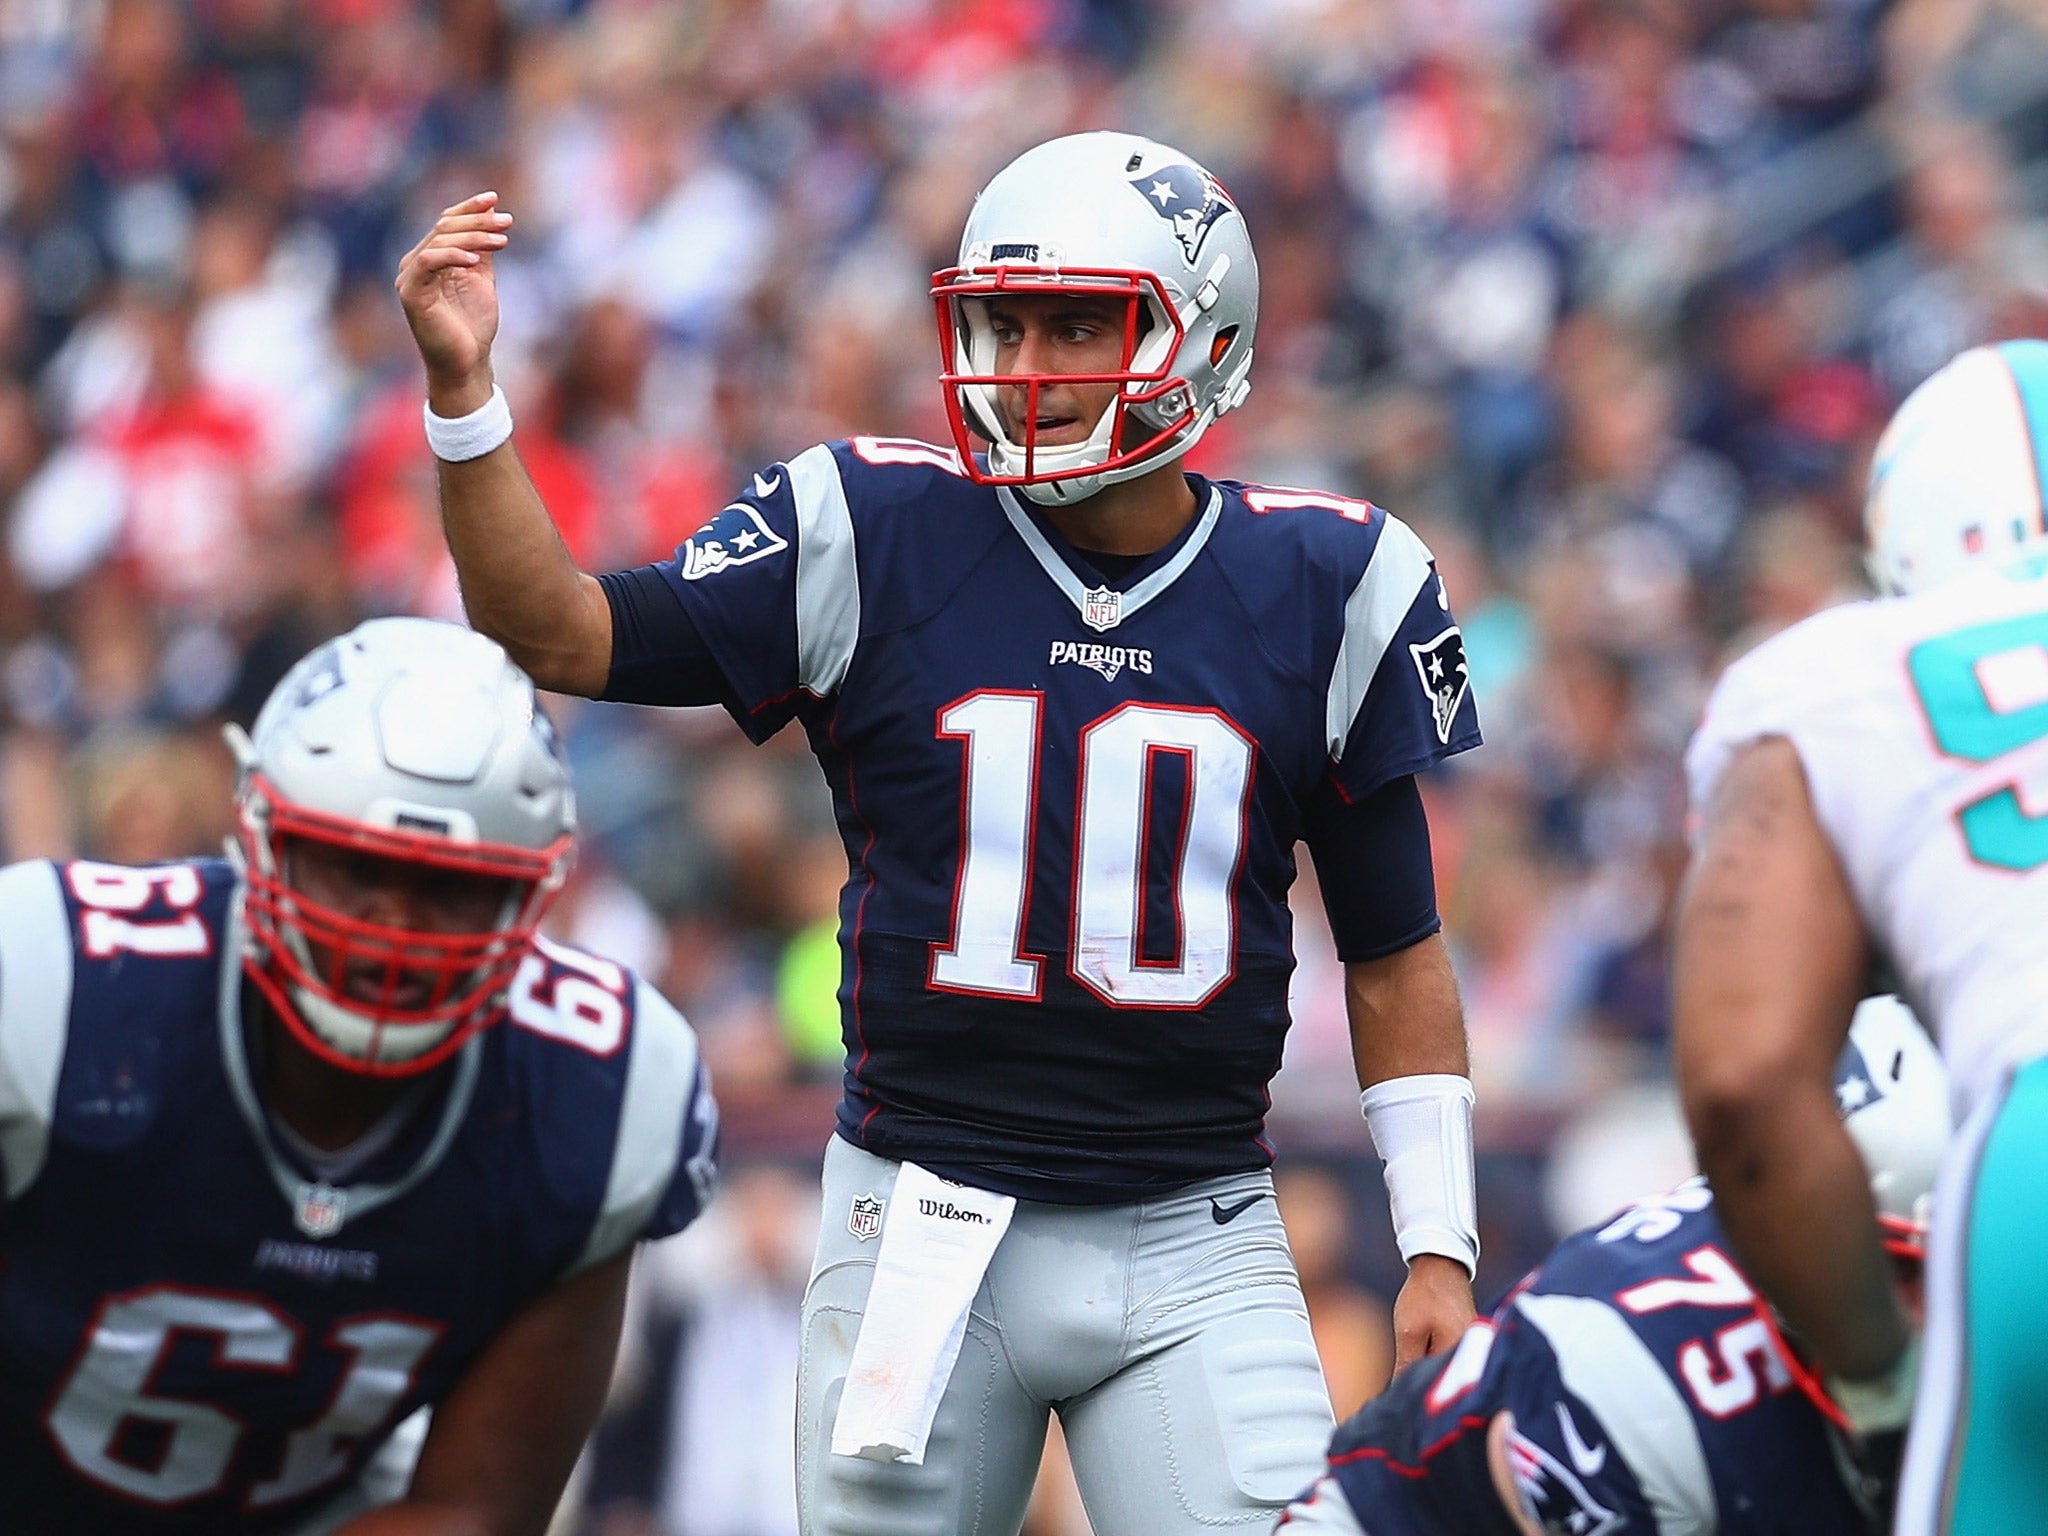 Jimmy Garoppolo picked up an injury during the New England Patriots' win over the Miami Dolphins